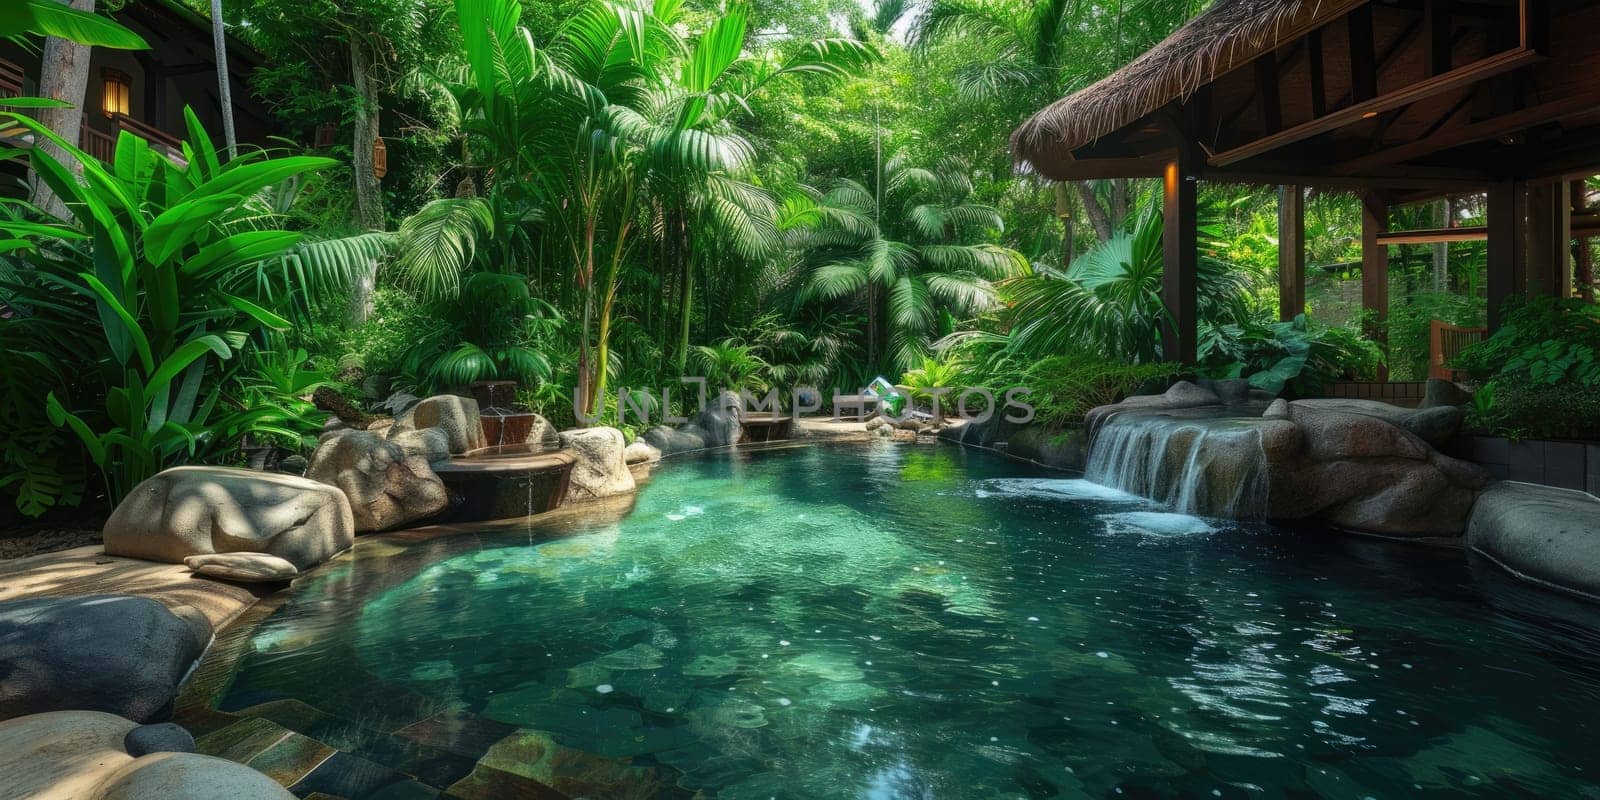 A luxurious spa retreat in a tropical setting, serene pool. Resplendent. by biancoblue